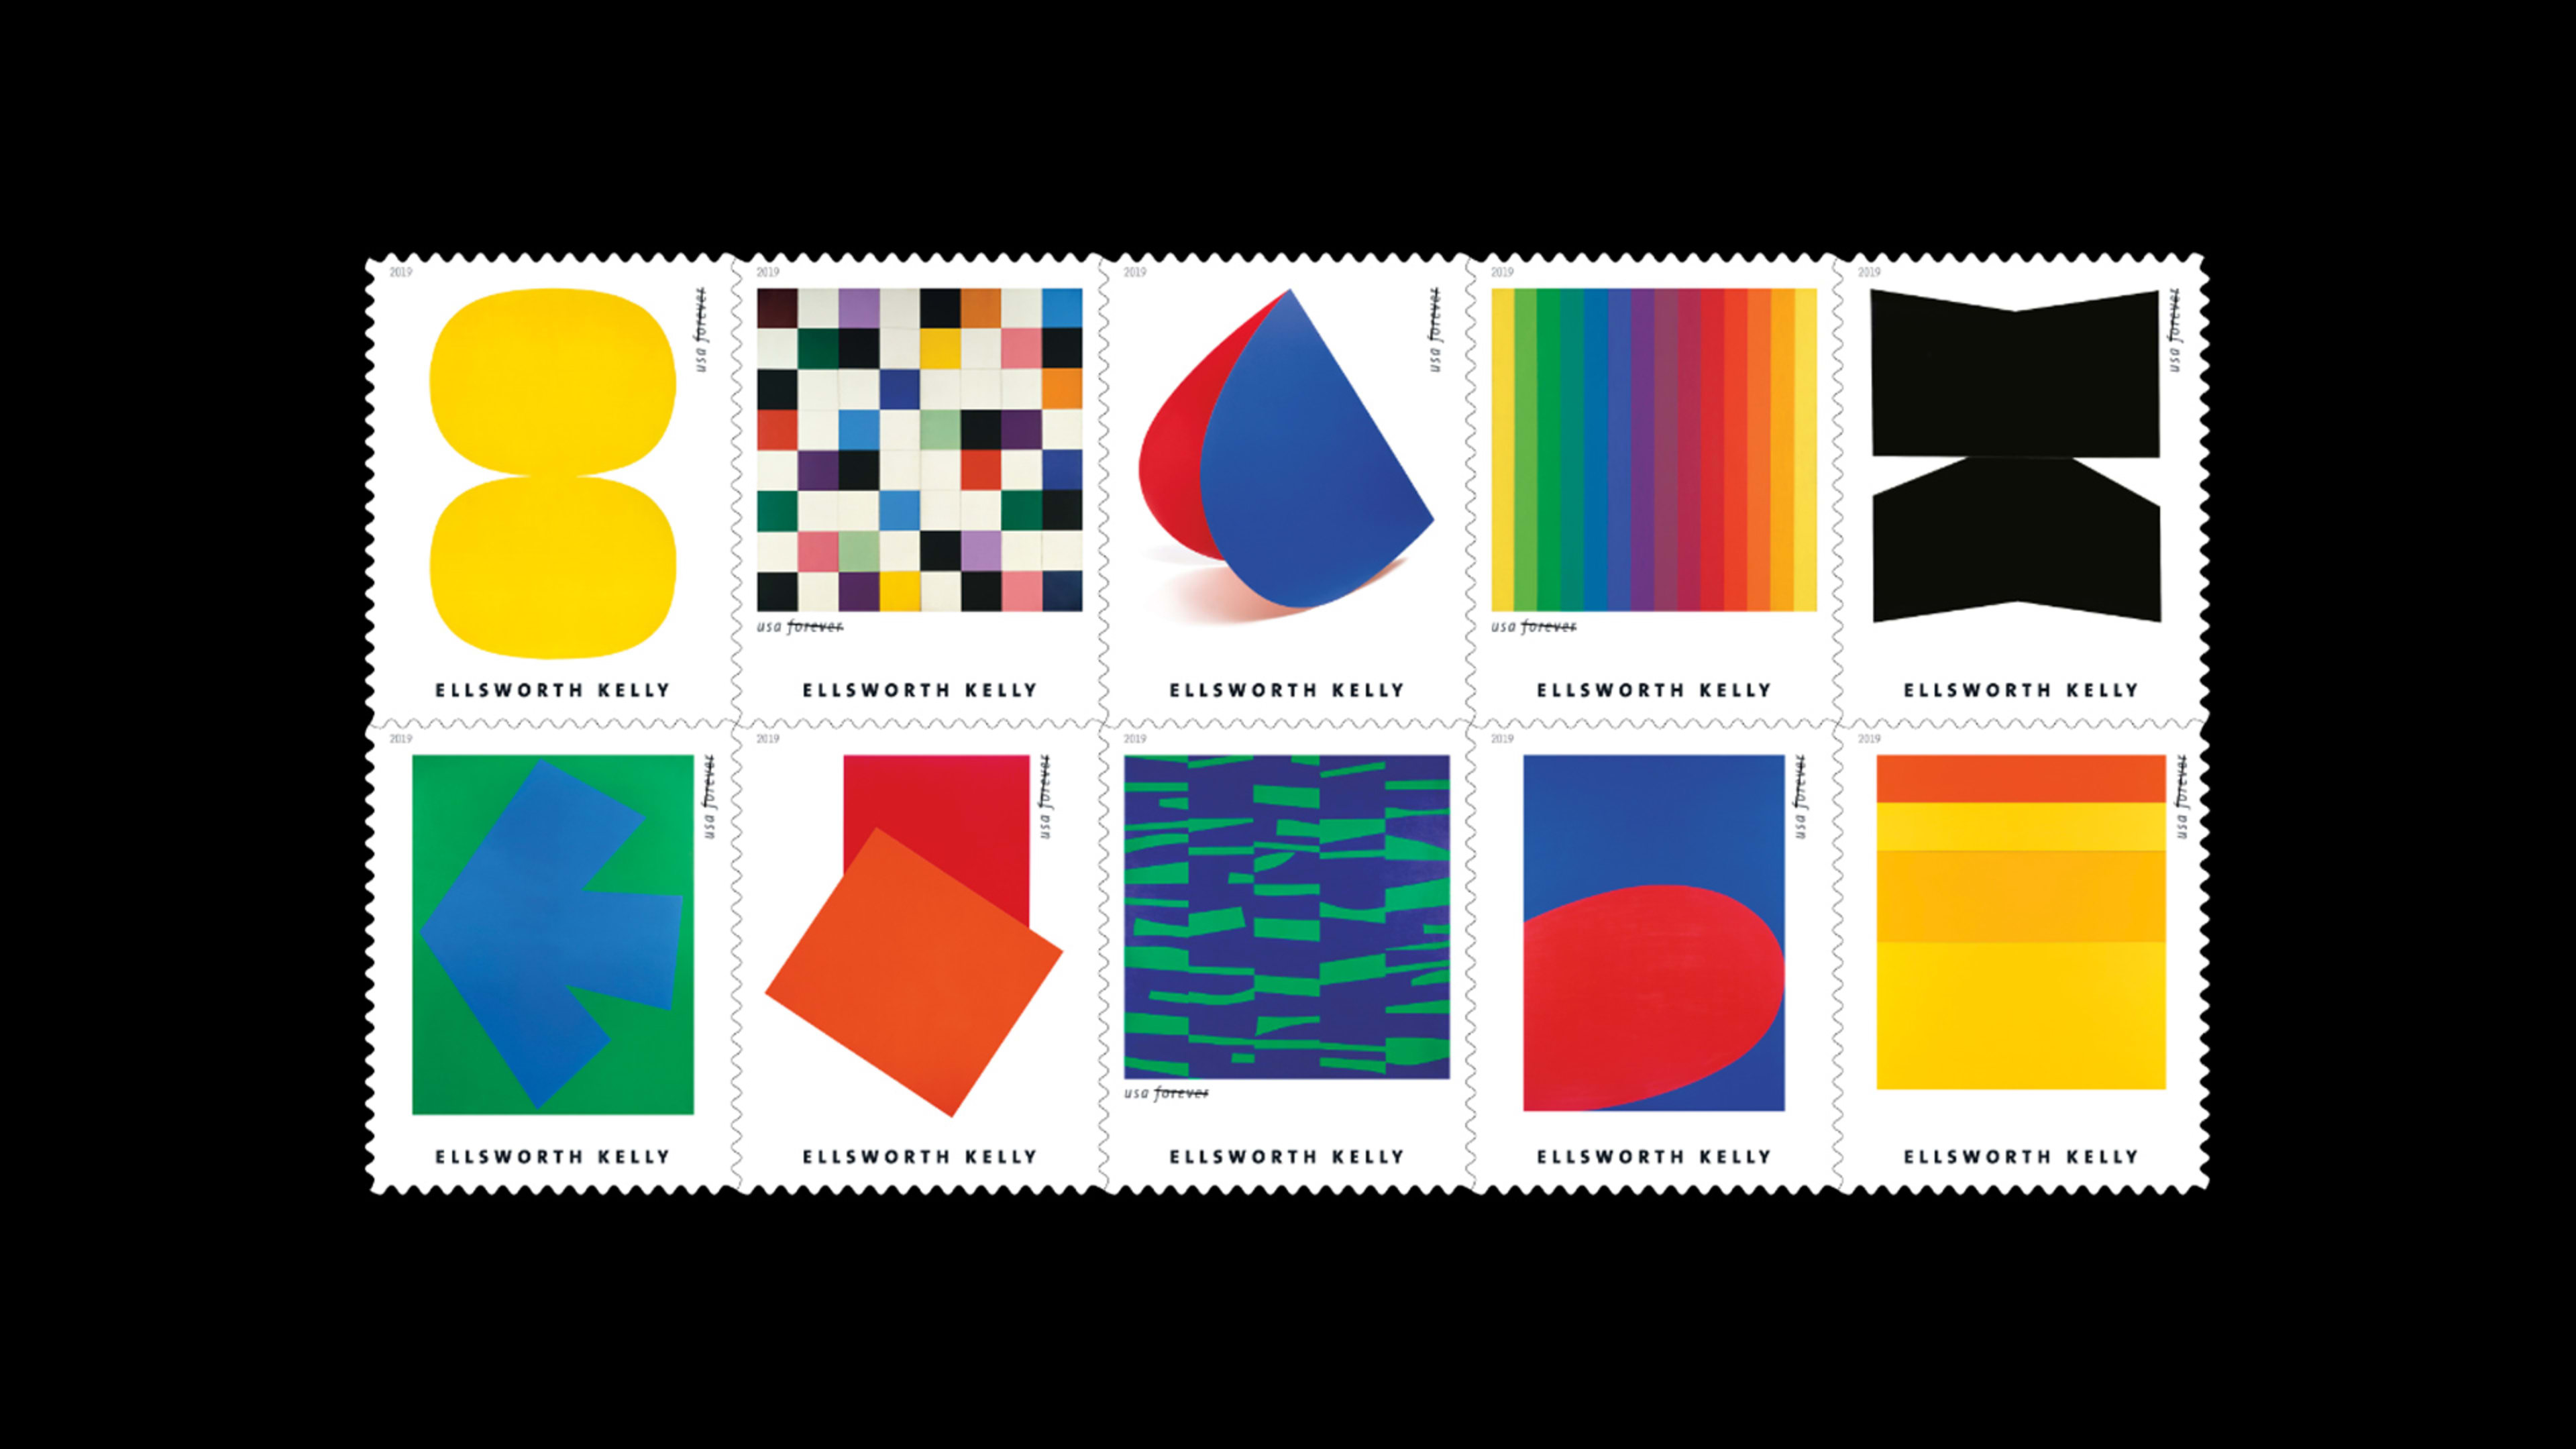 Buy a book (or three) of the USPS’s new Ellsworth Kelly stamps